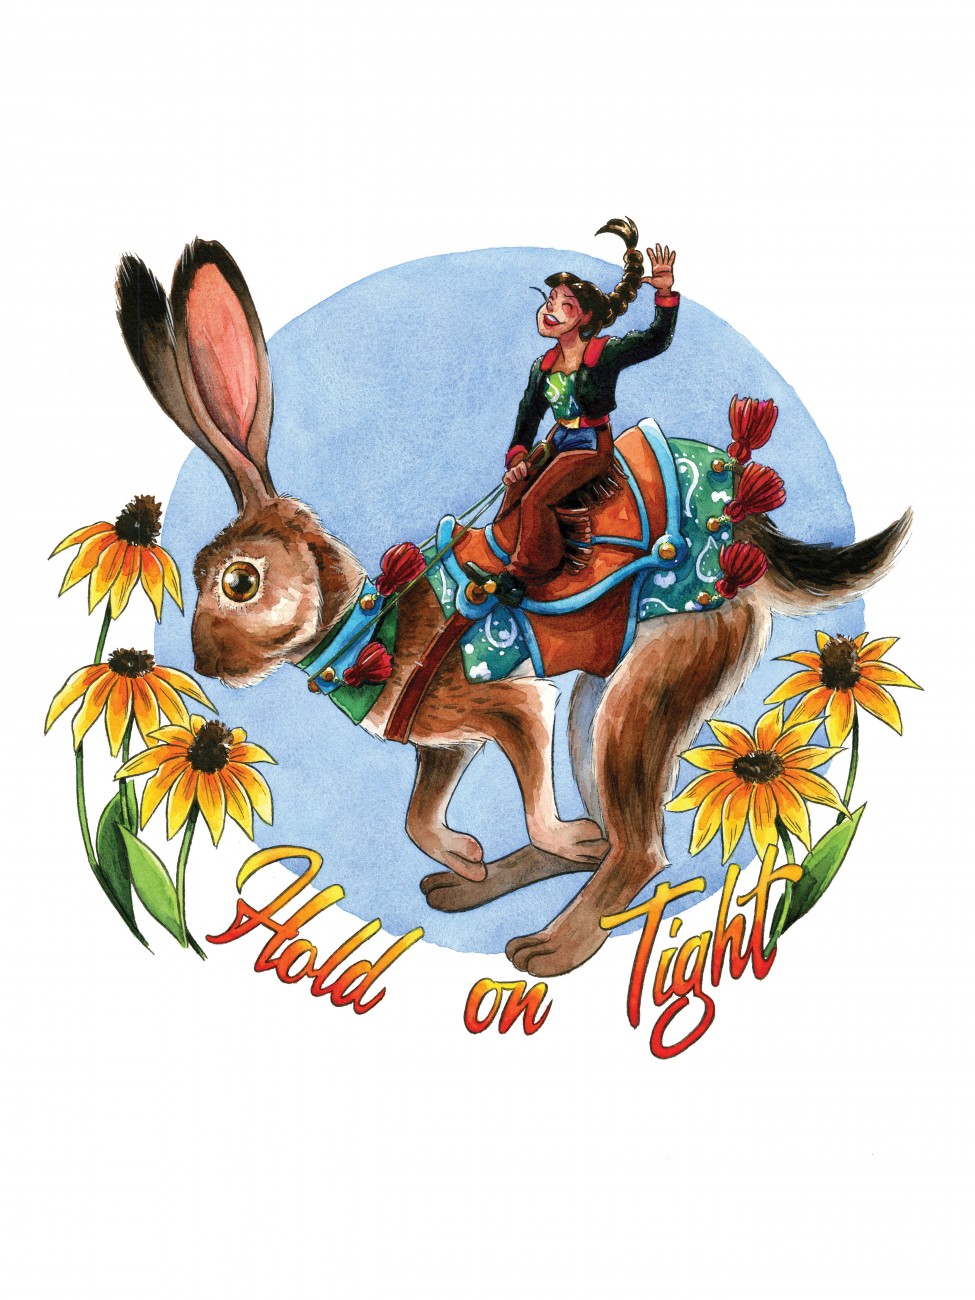 Watercolor illustration of a girl in rodeo gear riding a jackrabbit.  Text reads Hold on Tight.